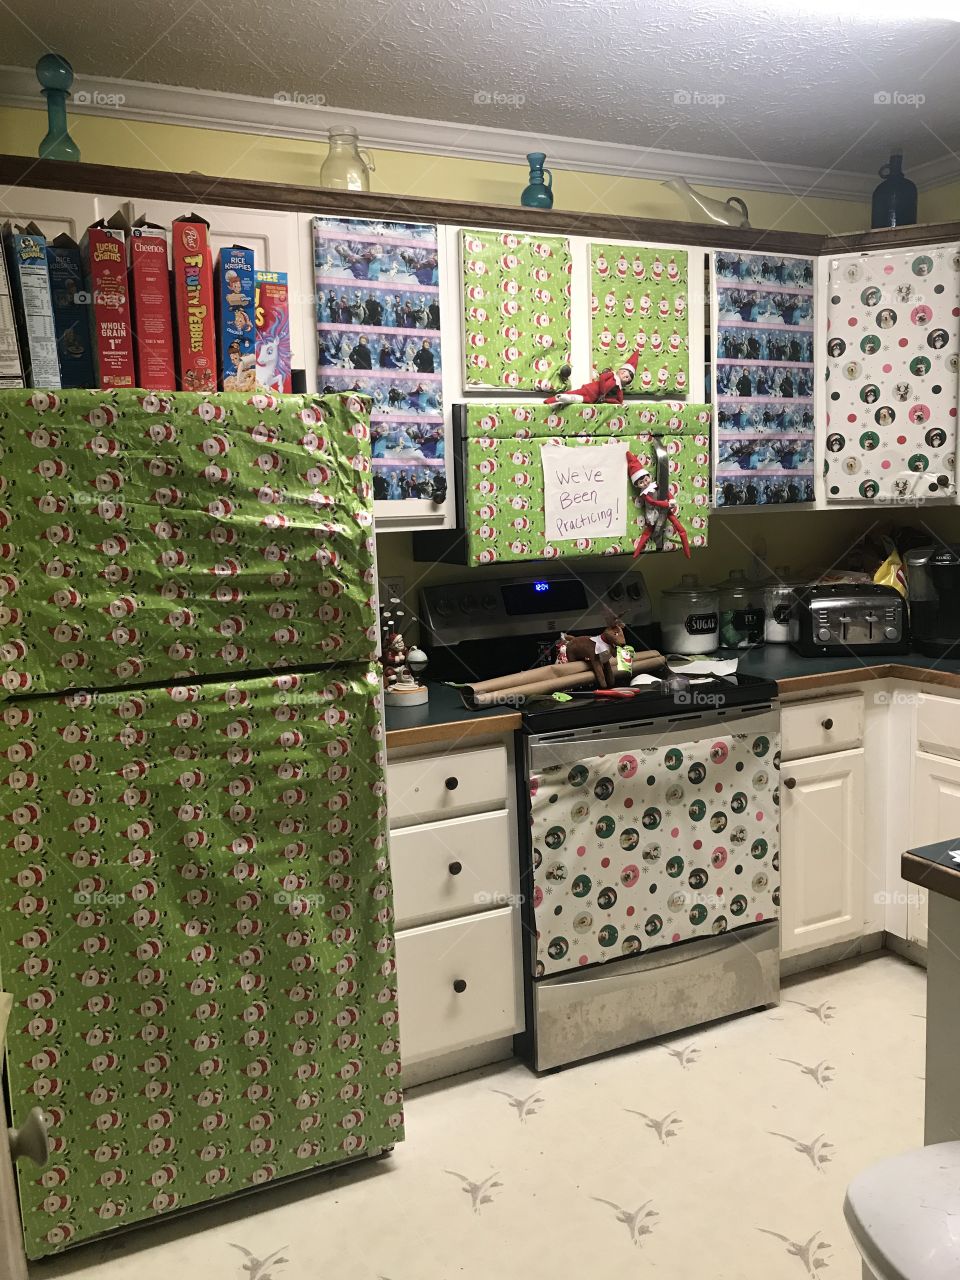 Our magical little elves from the north pole decided to gift wrap our entire kitchen. 